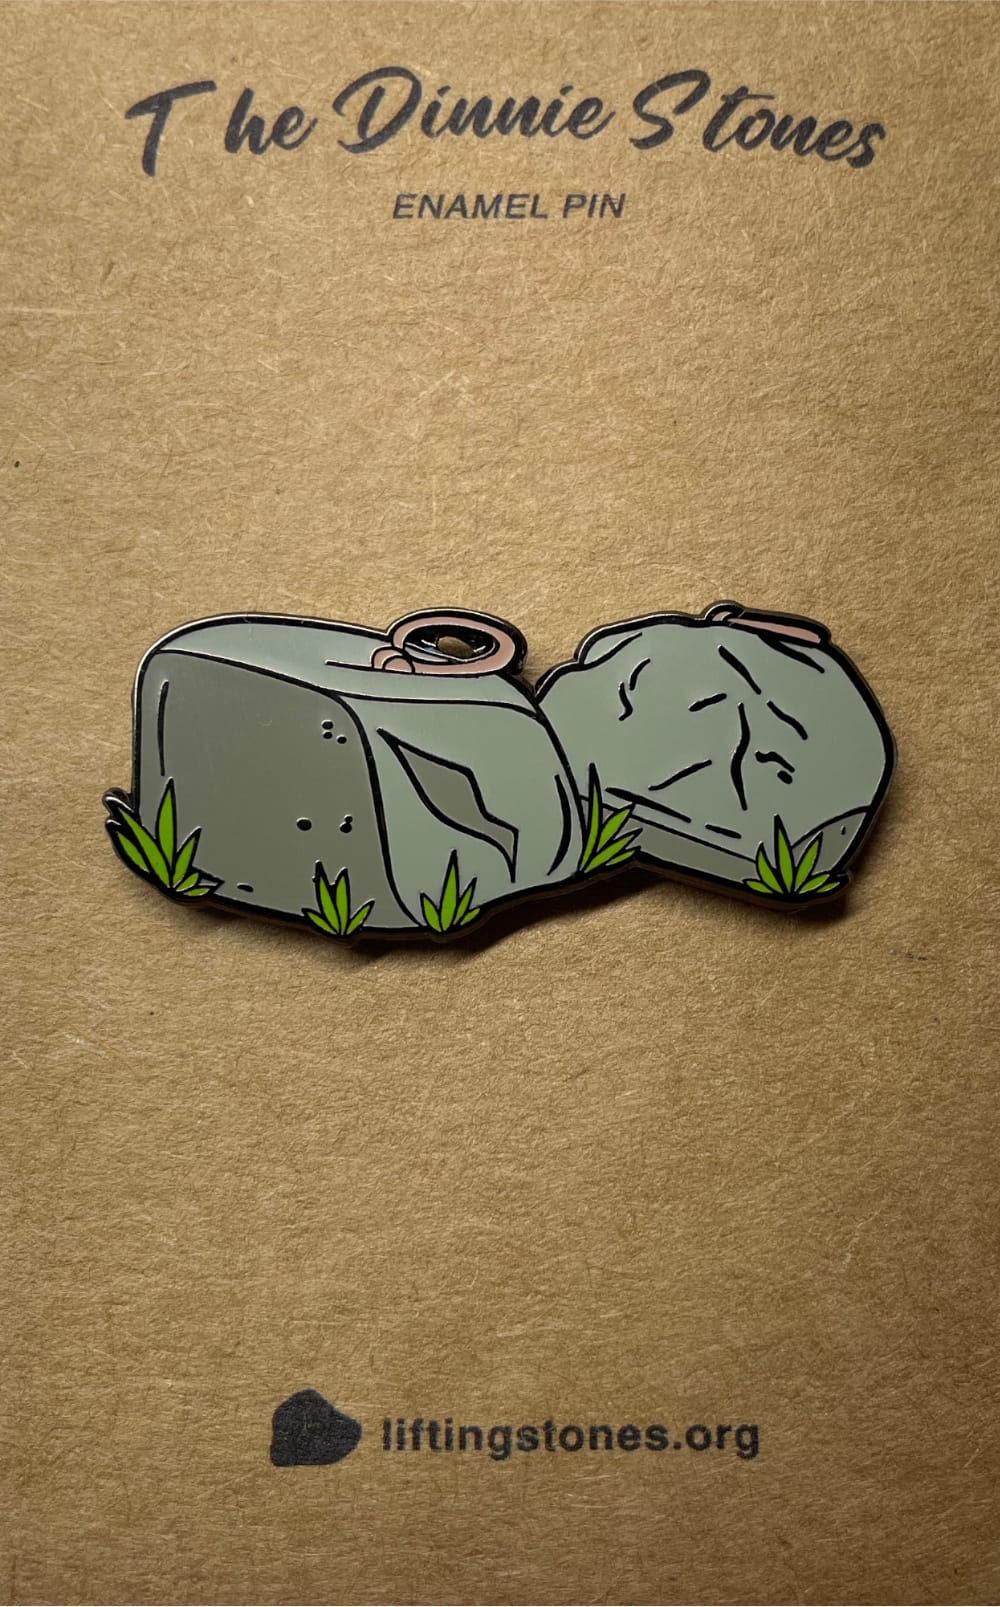 A picture of a Dinnie Stones enamel pin on a backing card.